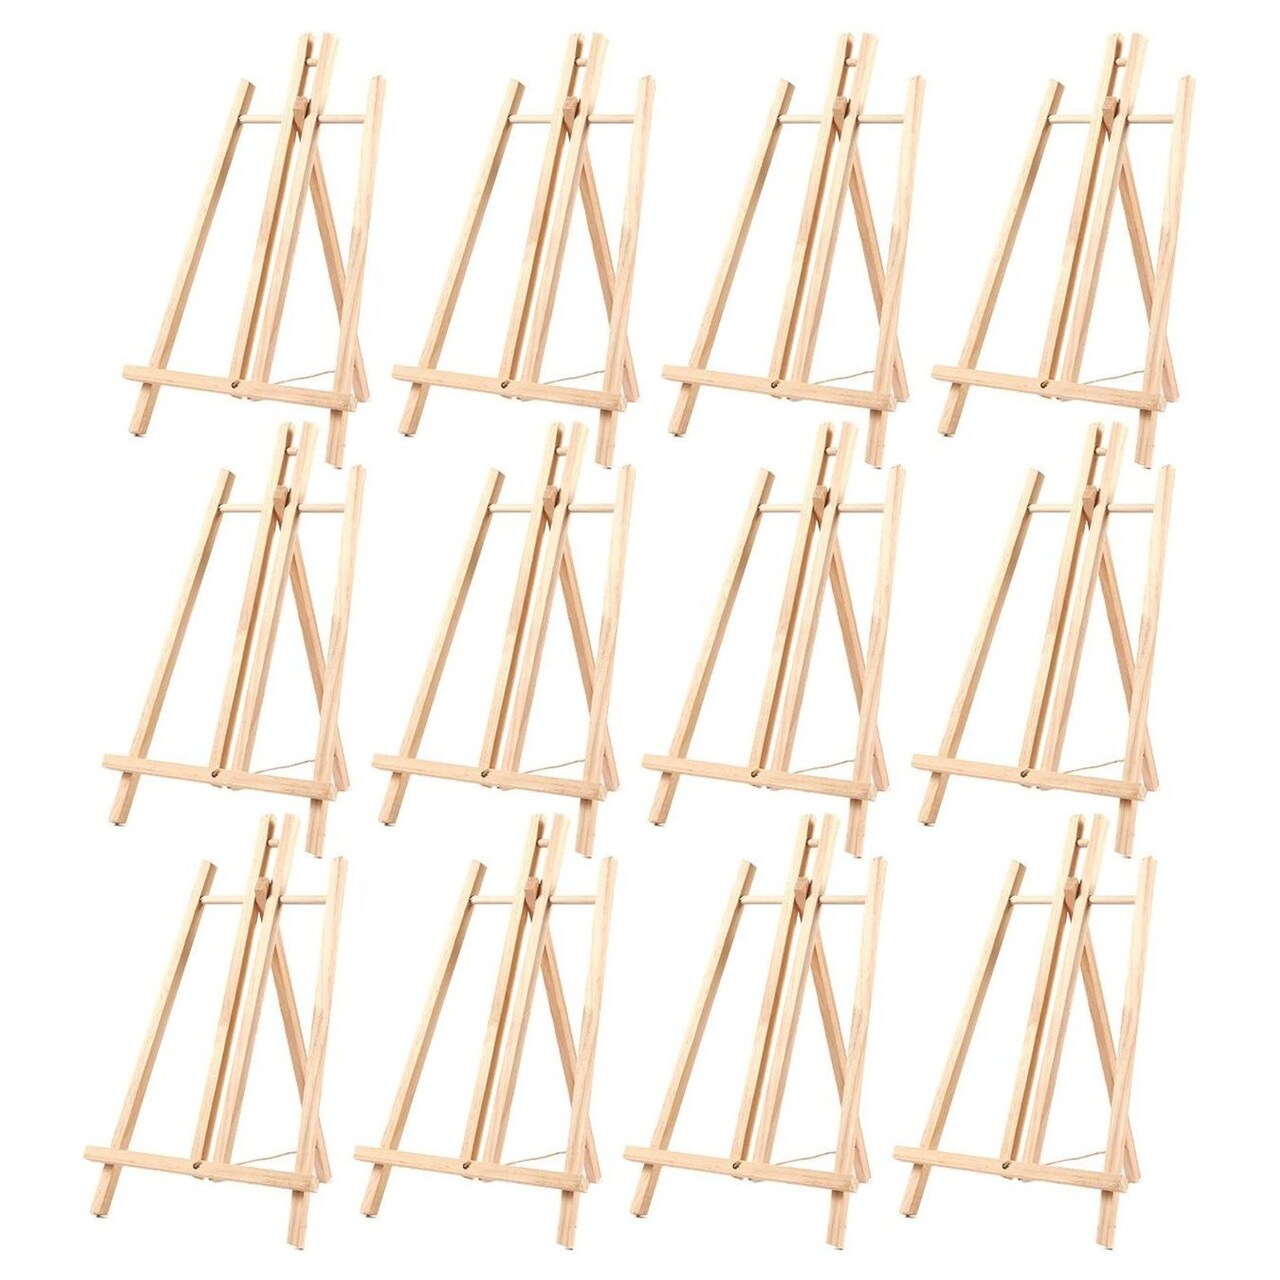 12 Pack Wood Table Top Easels for Painting, Small Artist Easel for